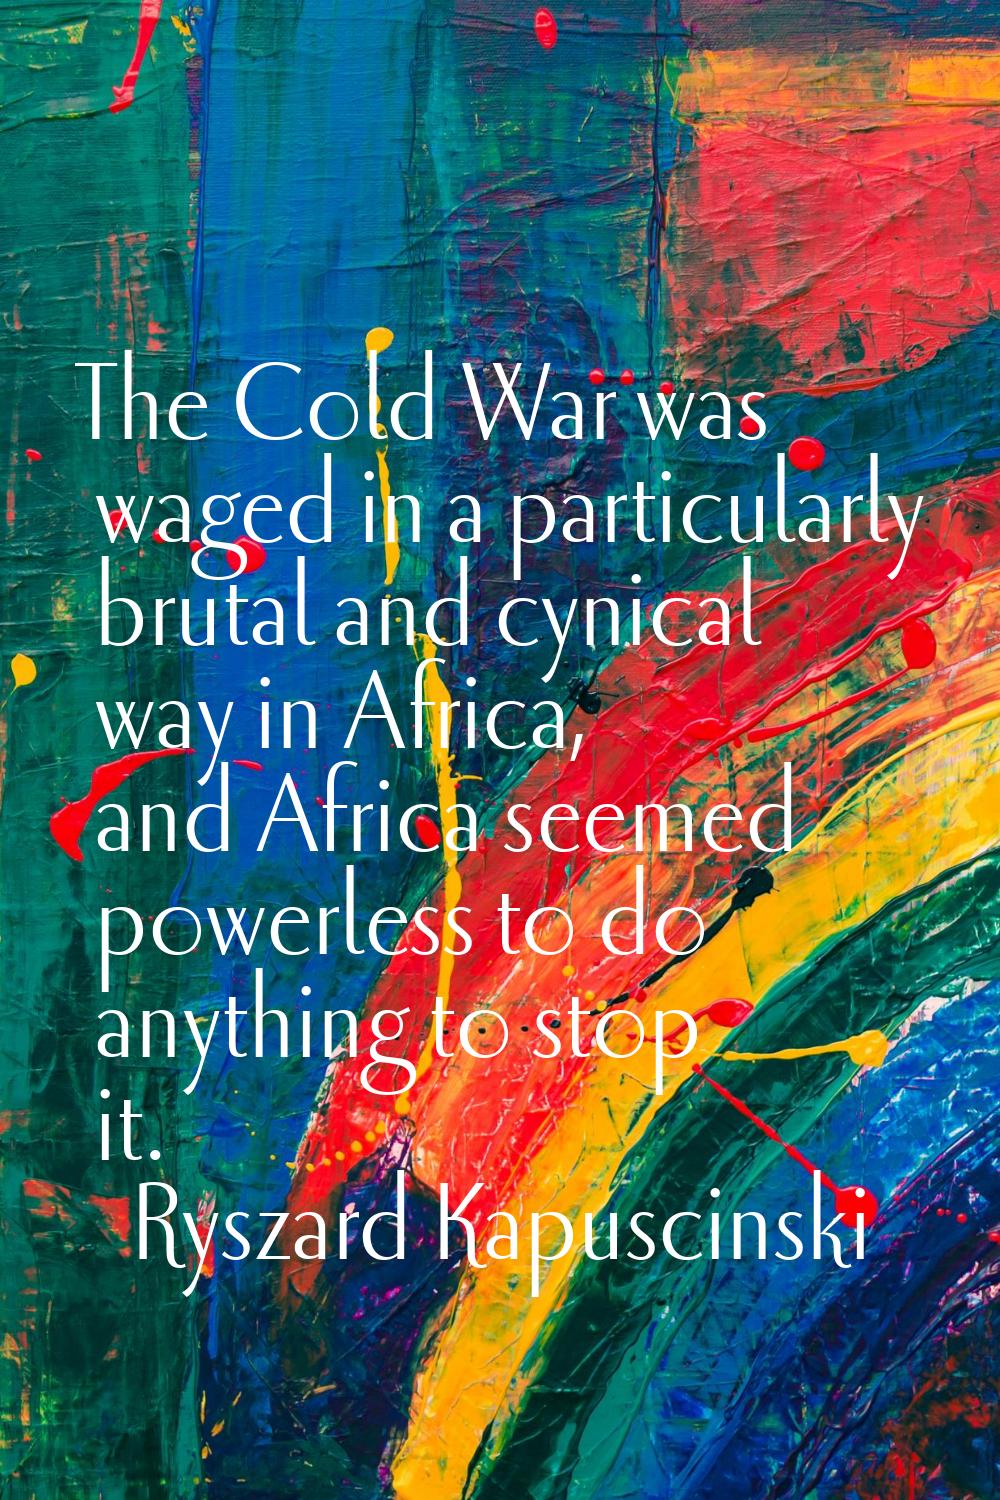 The Cold War was waged in a particularly brutal and cynical way in Africa, and Africa seemed powerl